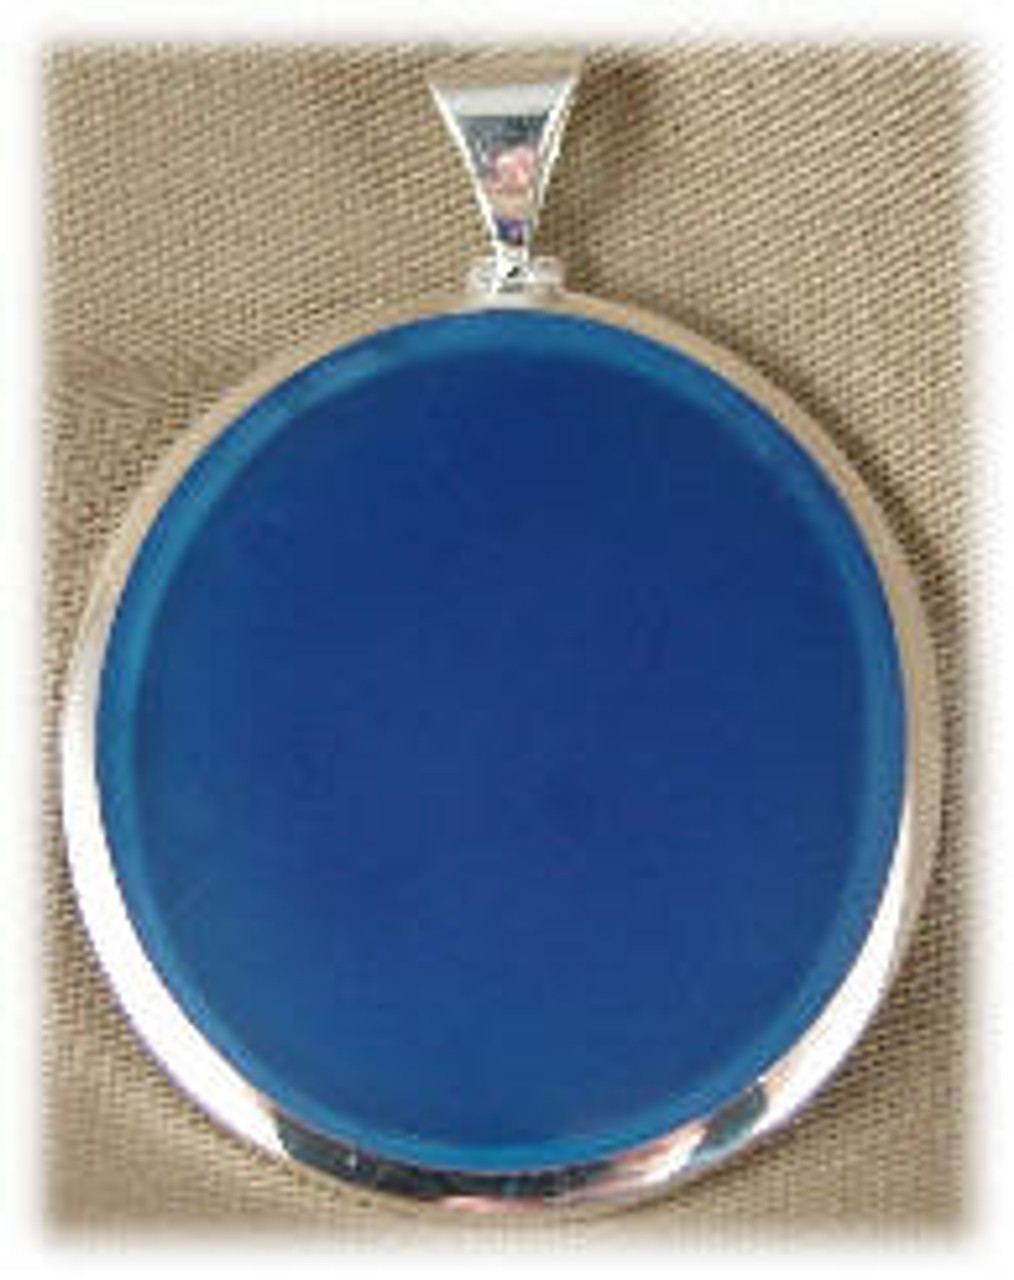 HS-304BLU: Oval Blue Onyx Pendent mounted in Sterling Silver, 1-1/2" wide x 1-3/4" long.